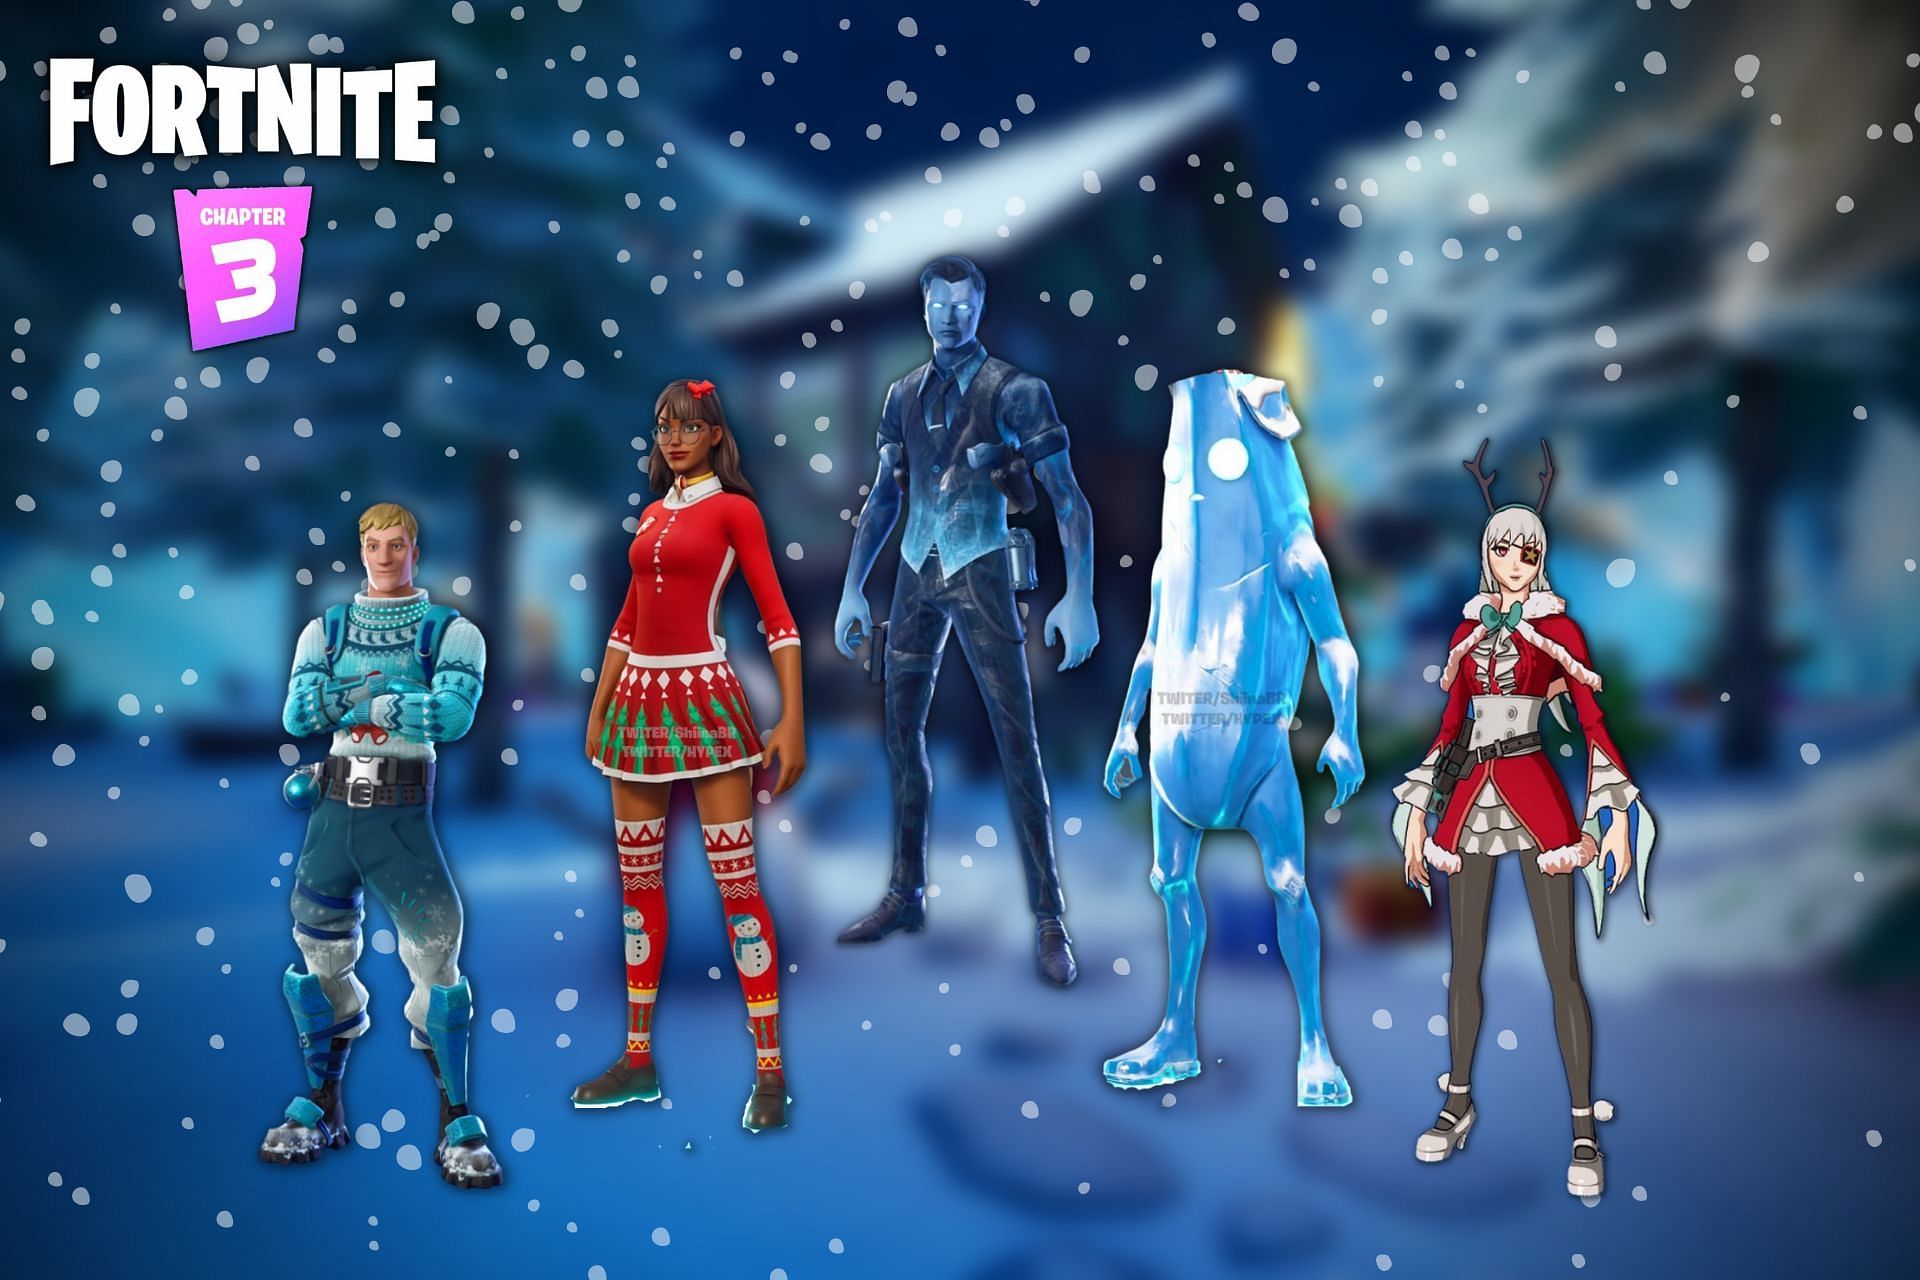 Fortnite Winterfest 2021 skins are some of the coolest yet (Image via Sportskeeda)